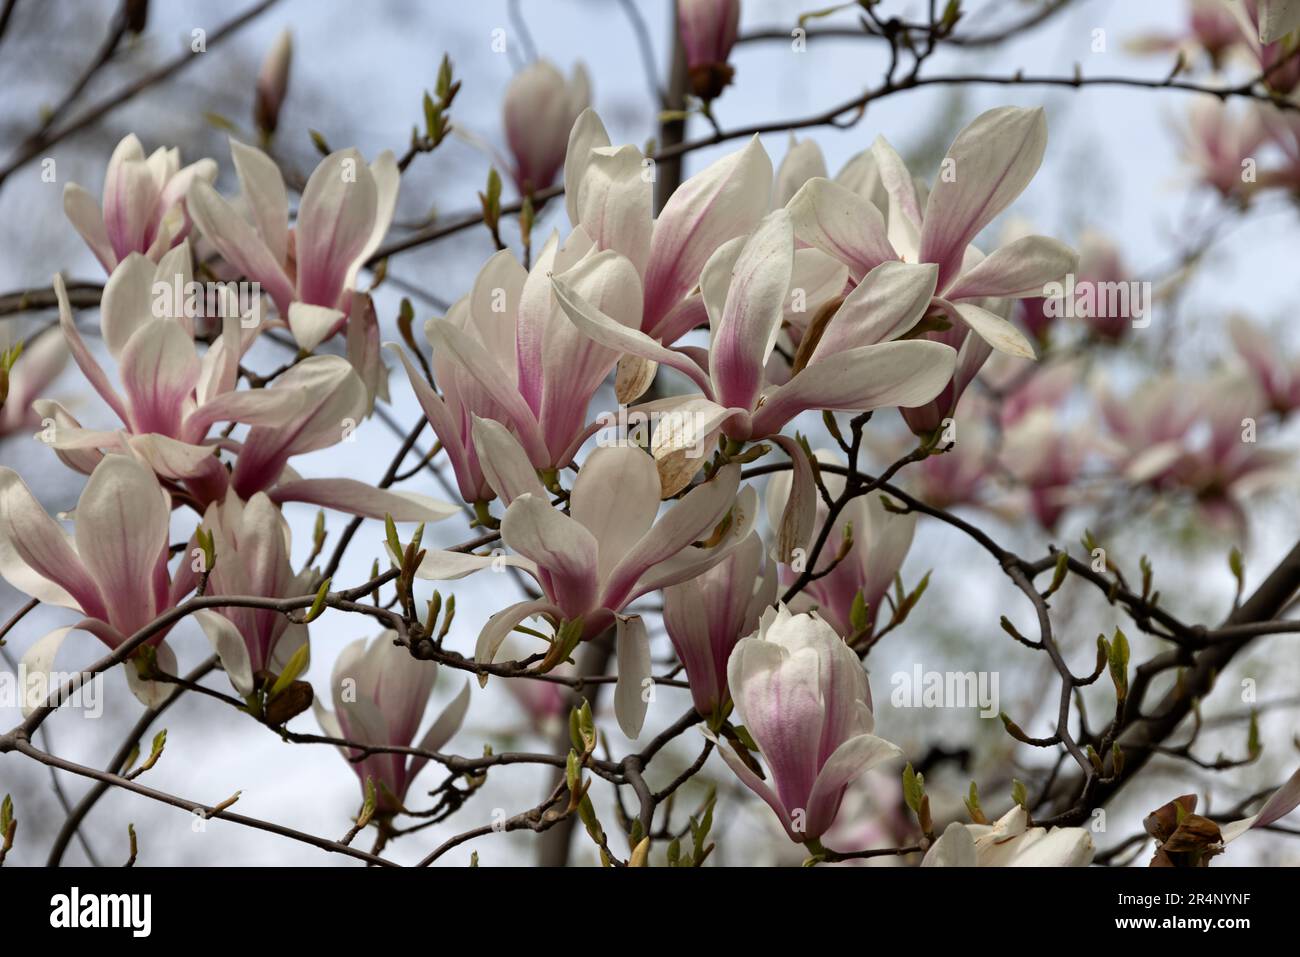 Pink magnolia liliflora flowers. Woody orchid tree in full bloom. Magnolia blooms in spring. Delicate pink magnolia flowers bloom in spring. Spring fl Stock Photo